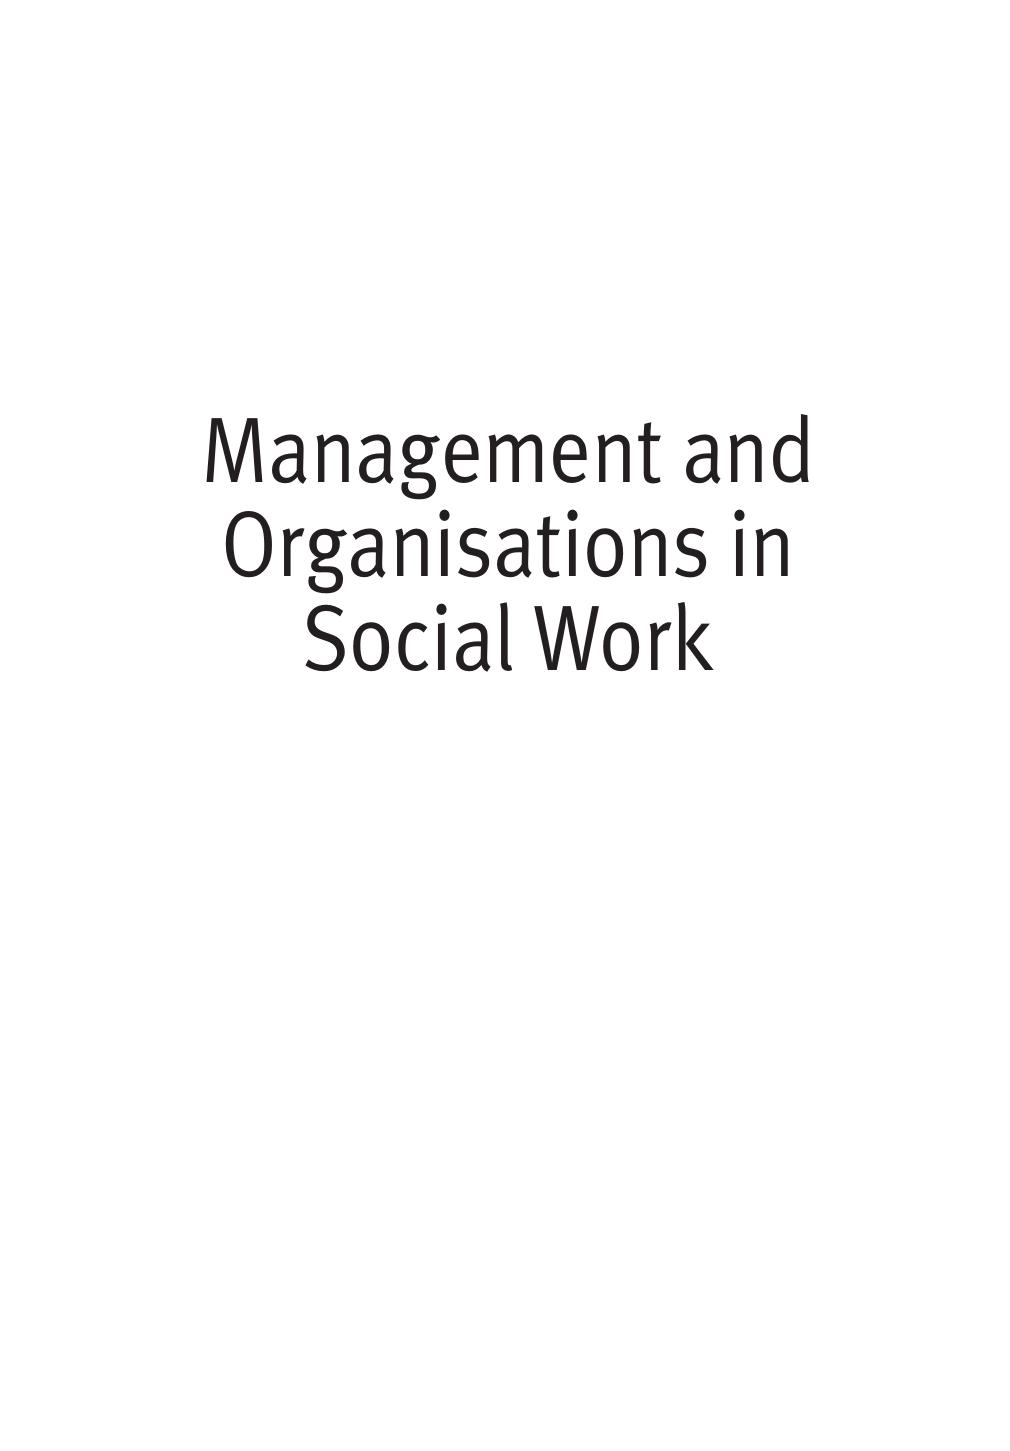 Management and Organisations in Social Work, 2nd Edition 2009 ( PDFDrive.com )